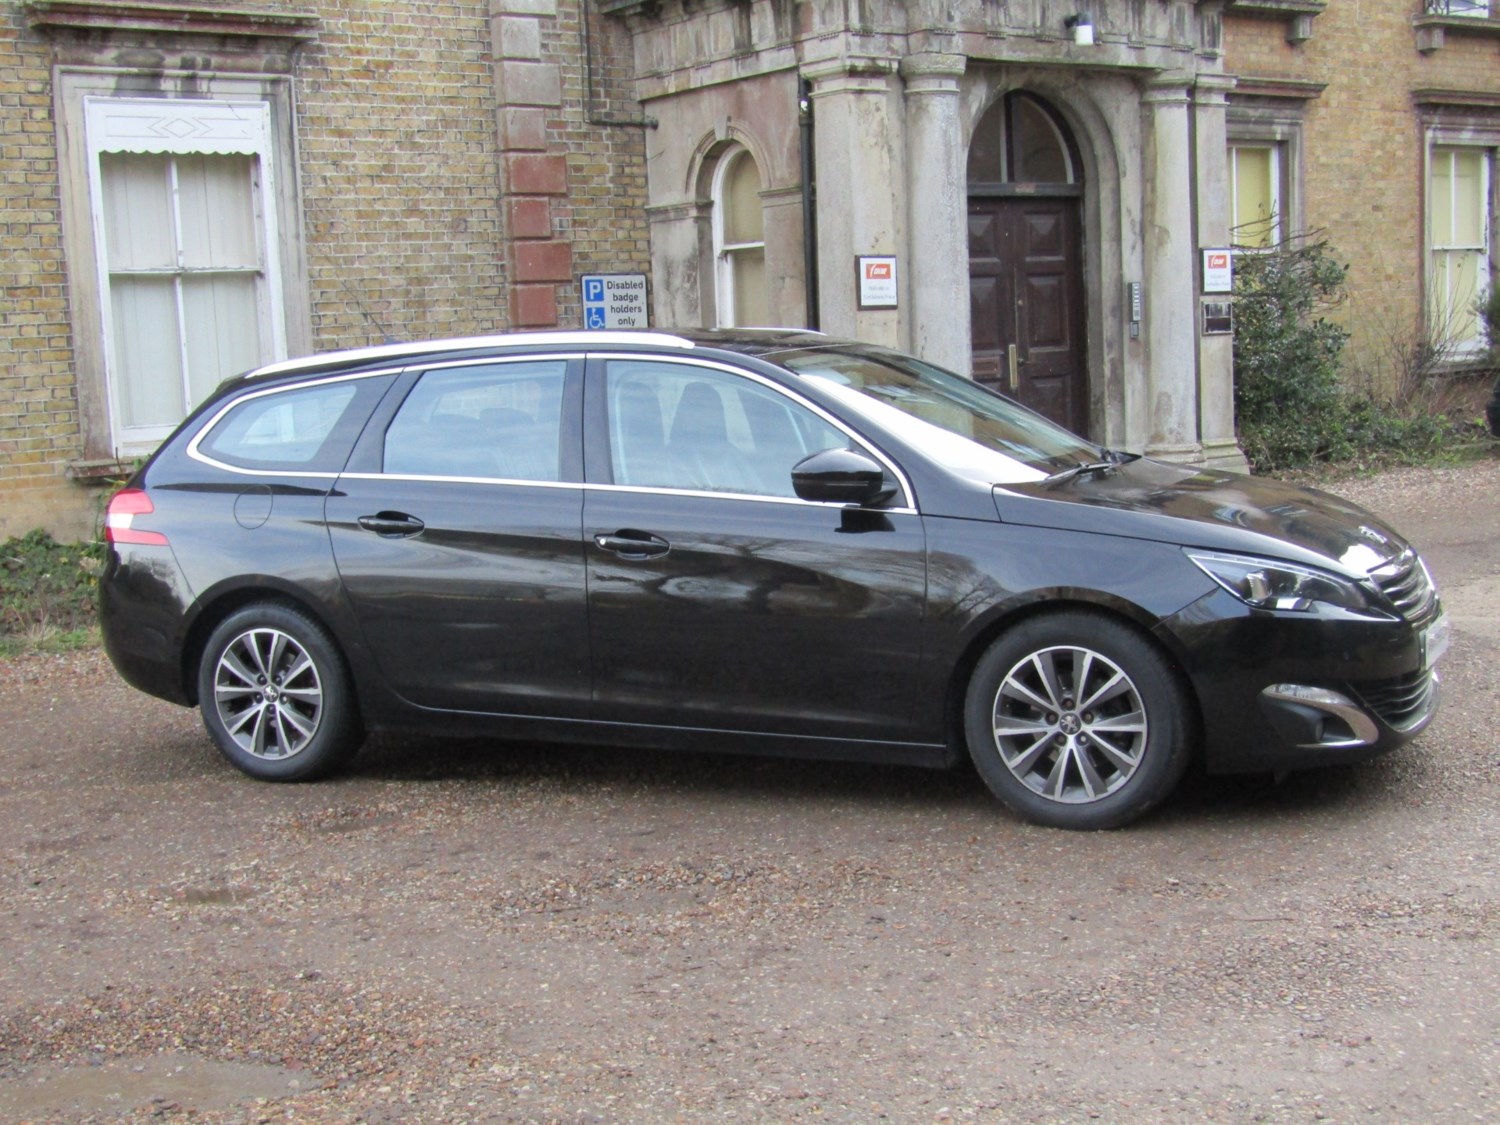 2015 (15) Peugeot 308 1.6 BlueHDi 120 Allure 5dr For Sale In Broadstairs, Kent